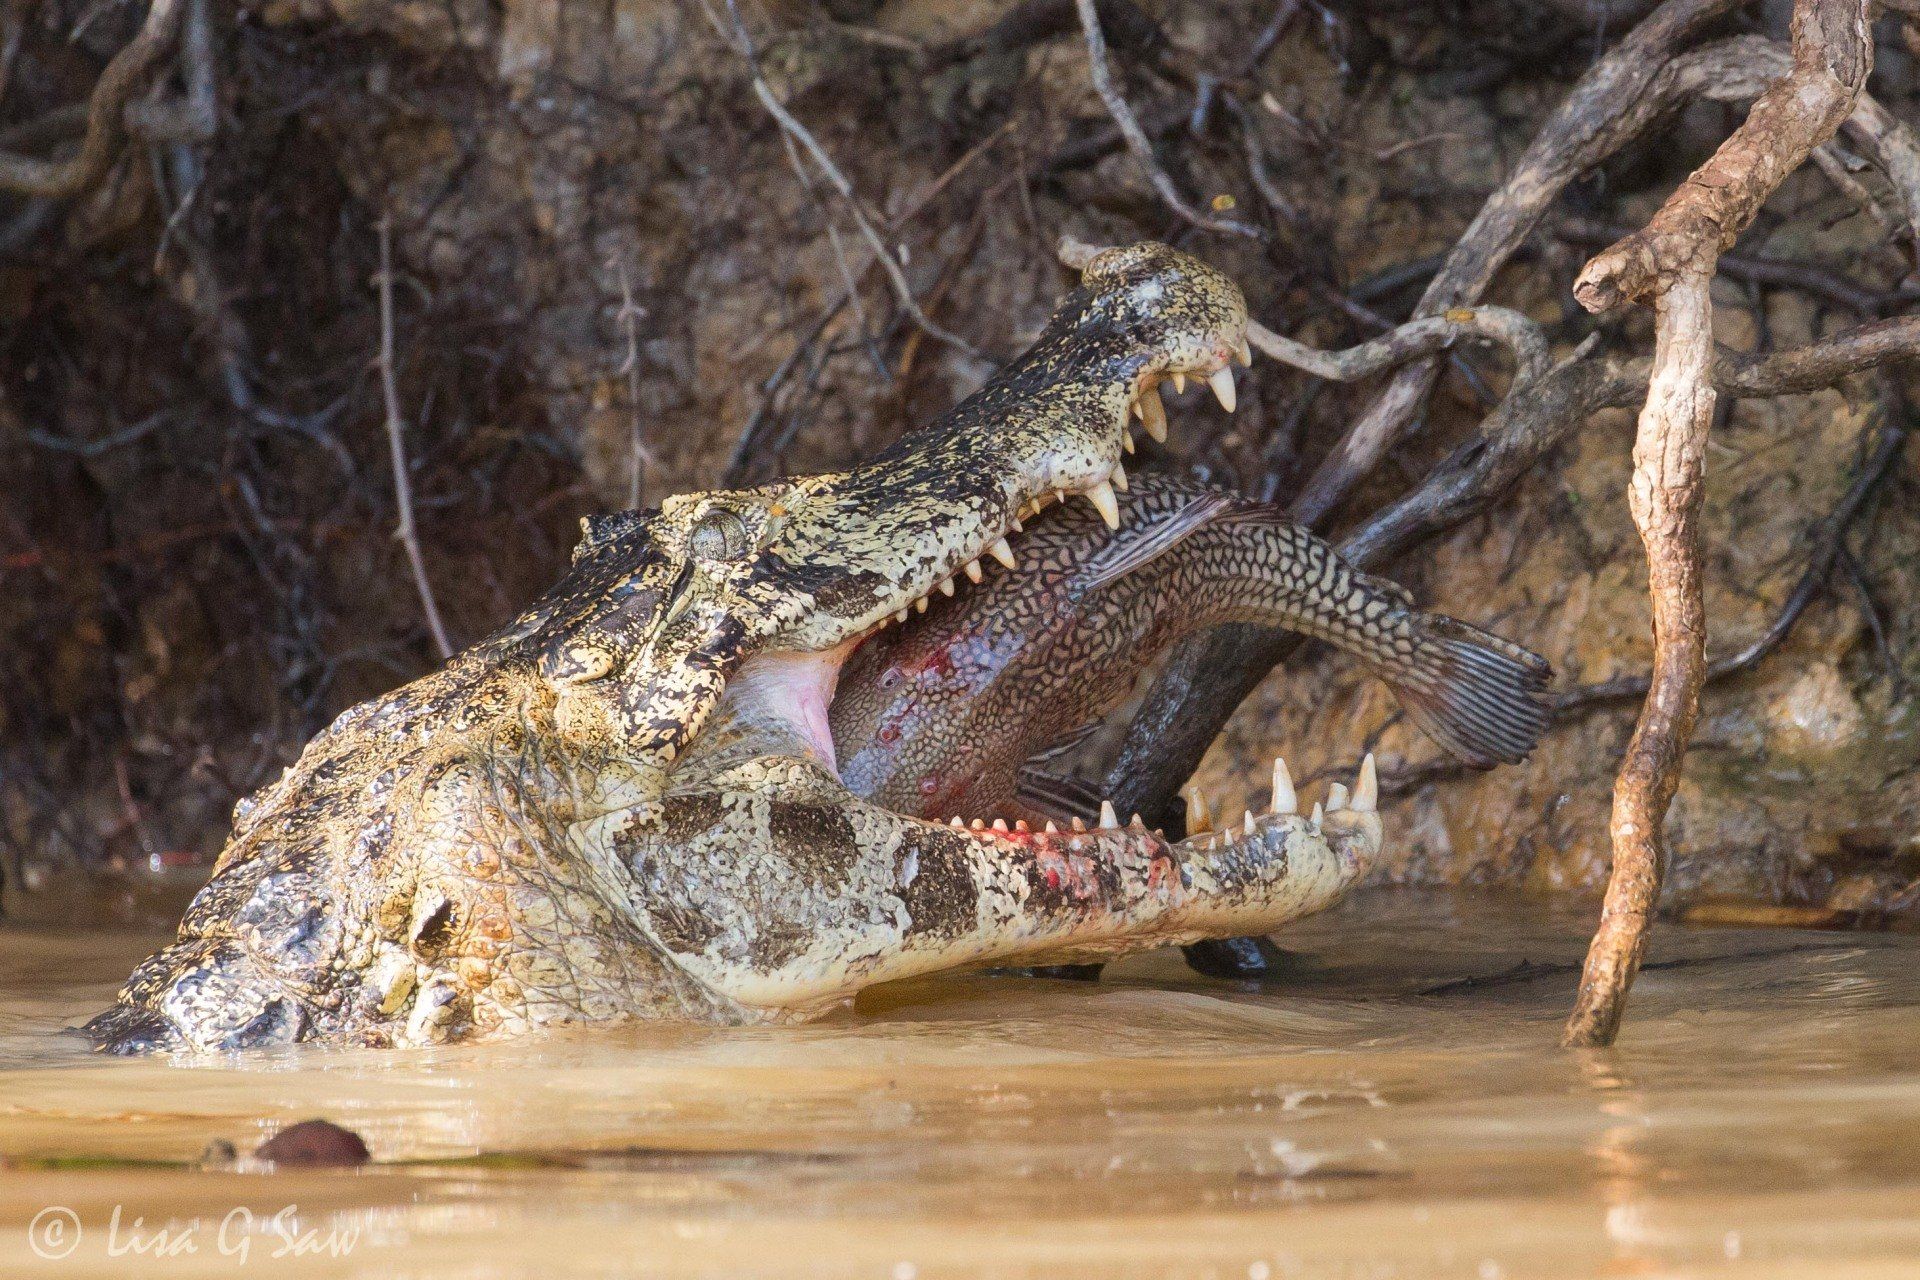 Yacare Caiman with Catfish in open mouth